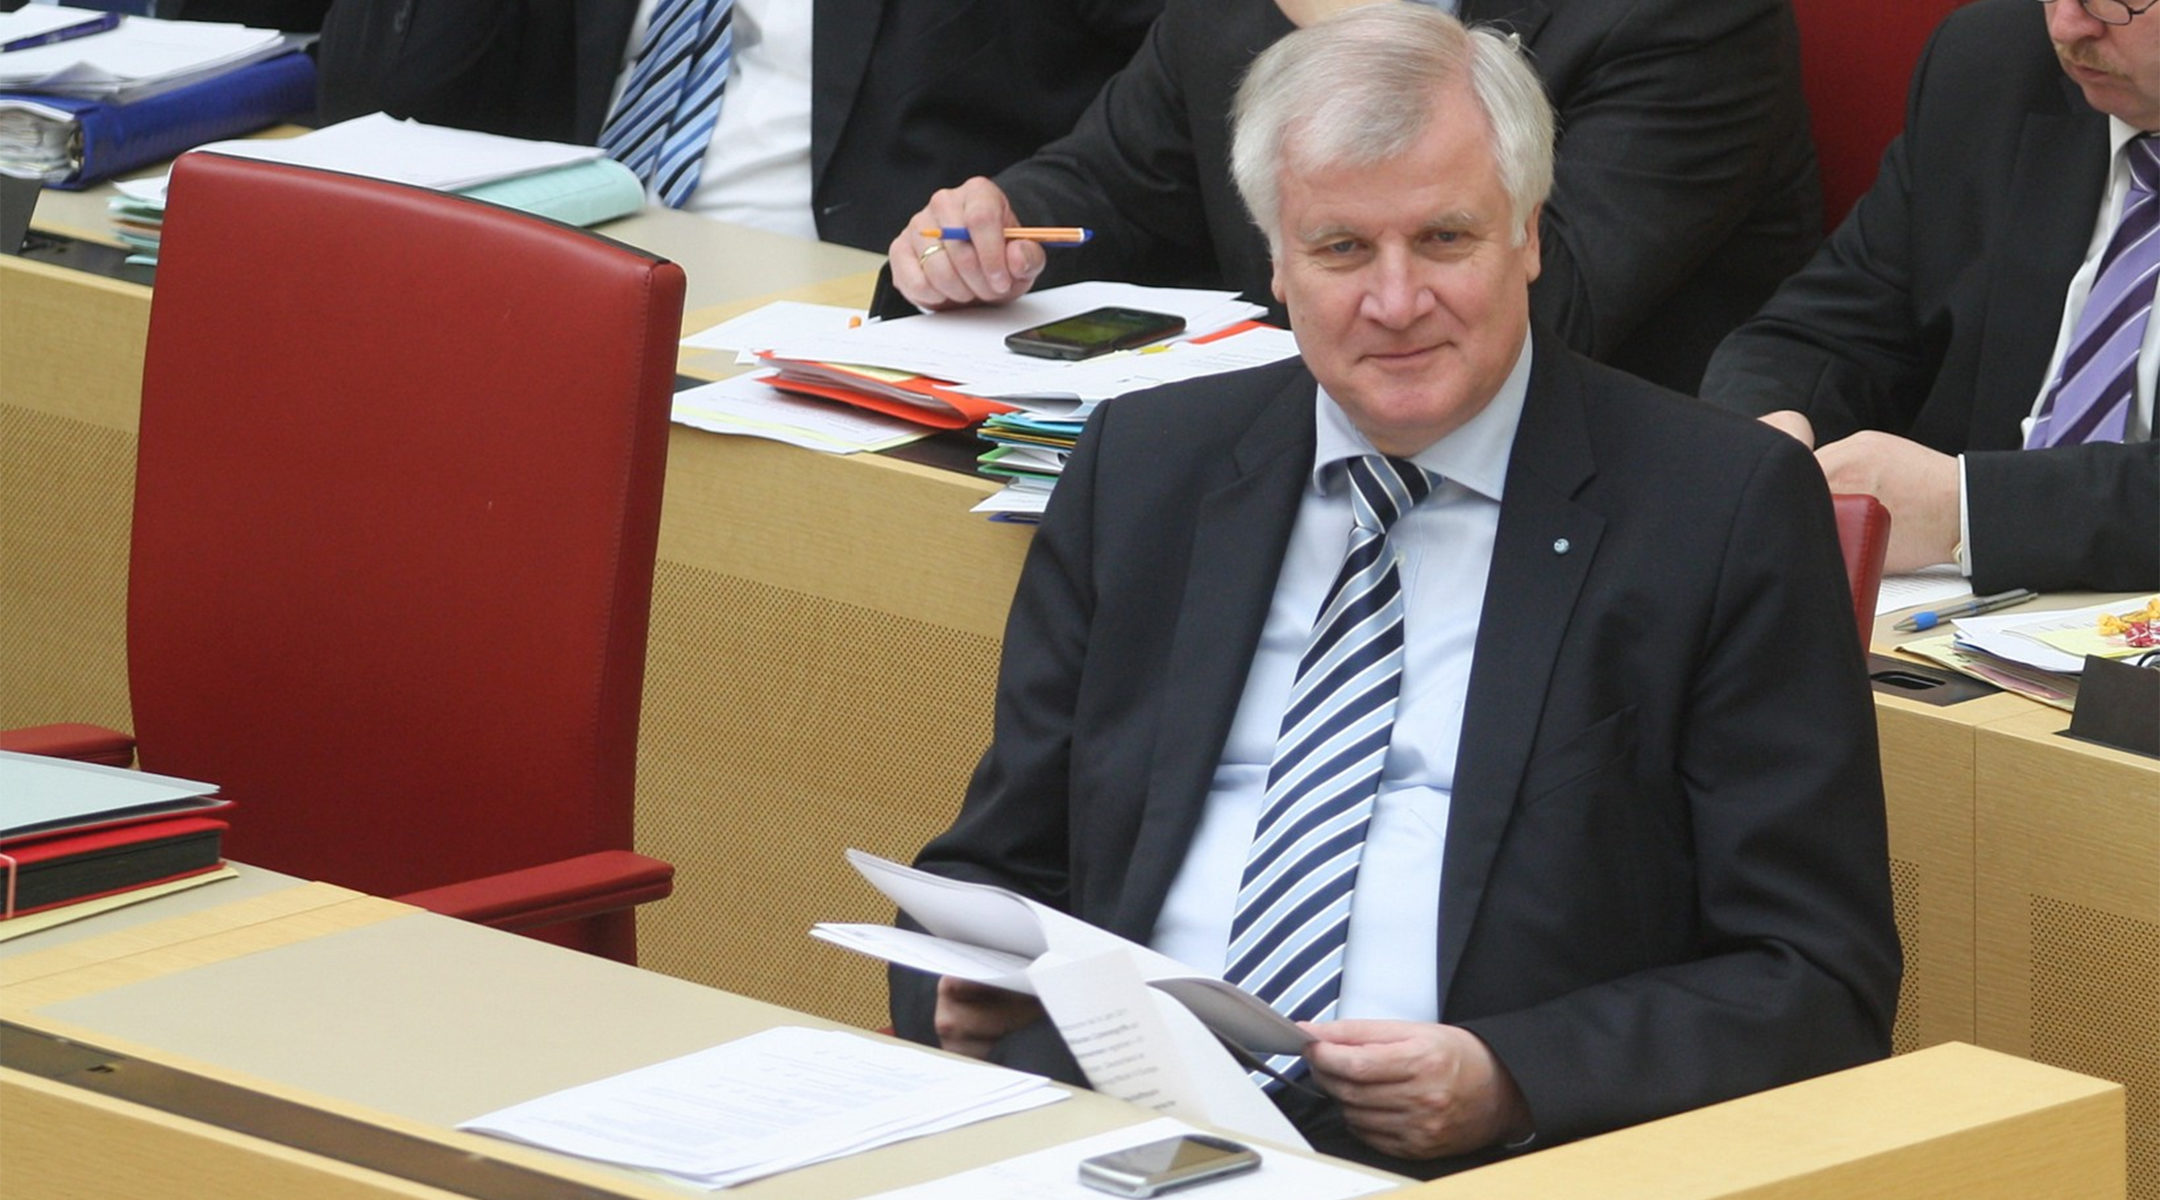 German Interior Minister Horst Seehofer attending a cabinet meeting in Munich, Germany on April 11, 2013. (Wikimedia Commons/Michael Lucan)